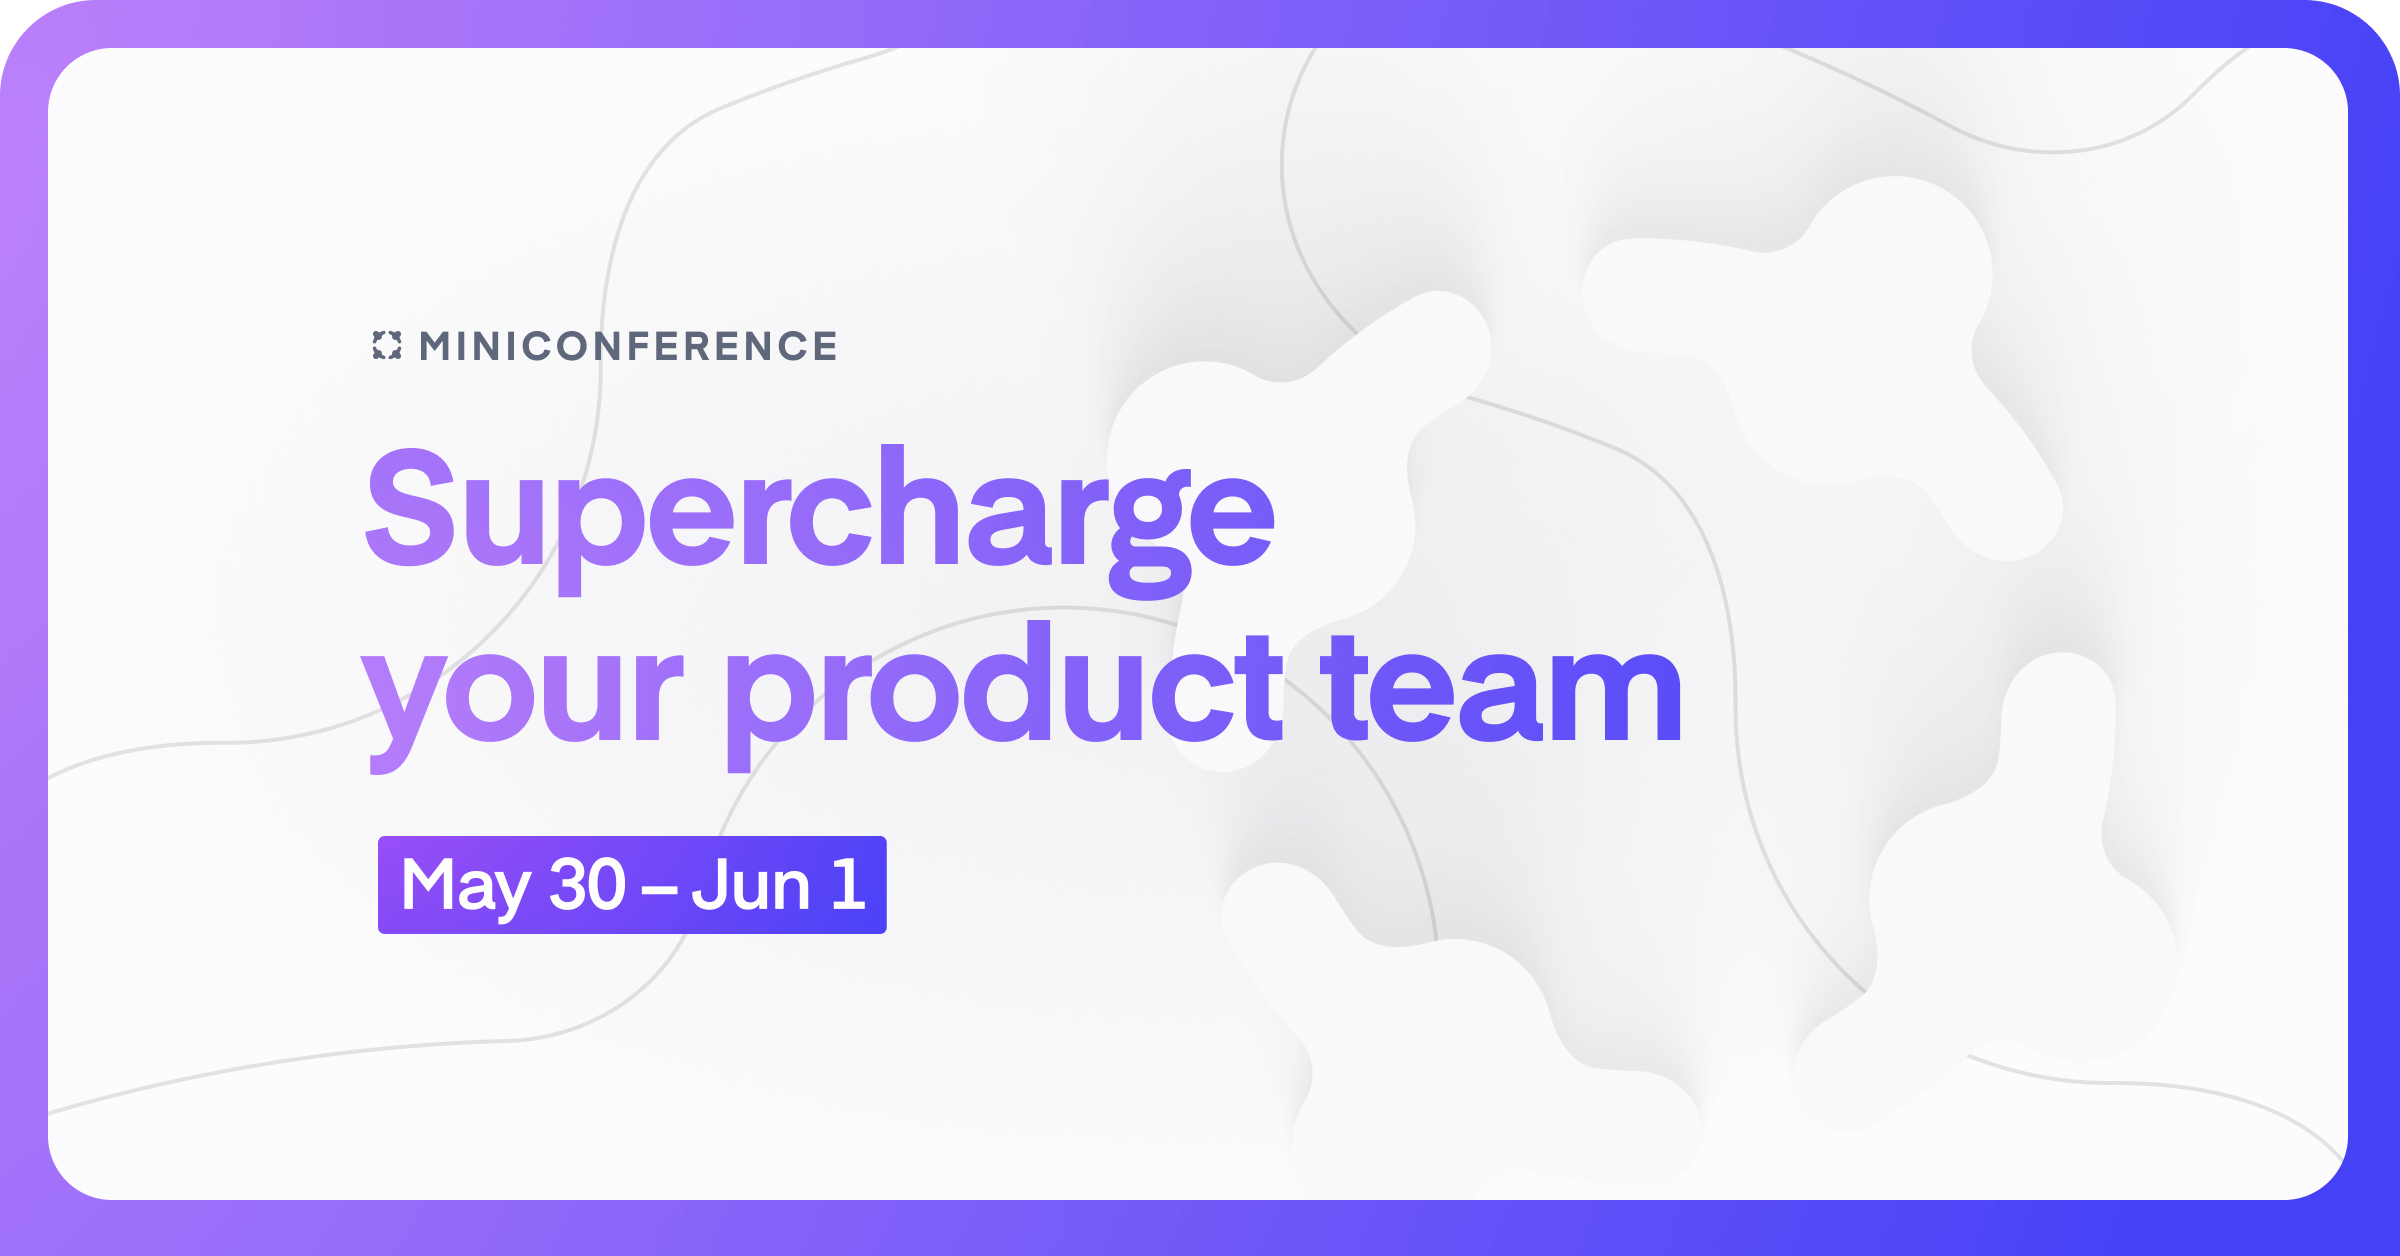 Supercharge your product team mini conference